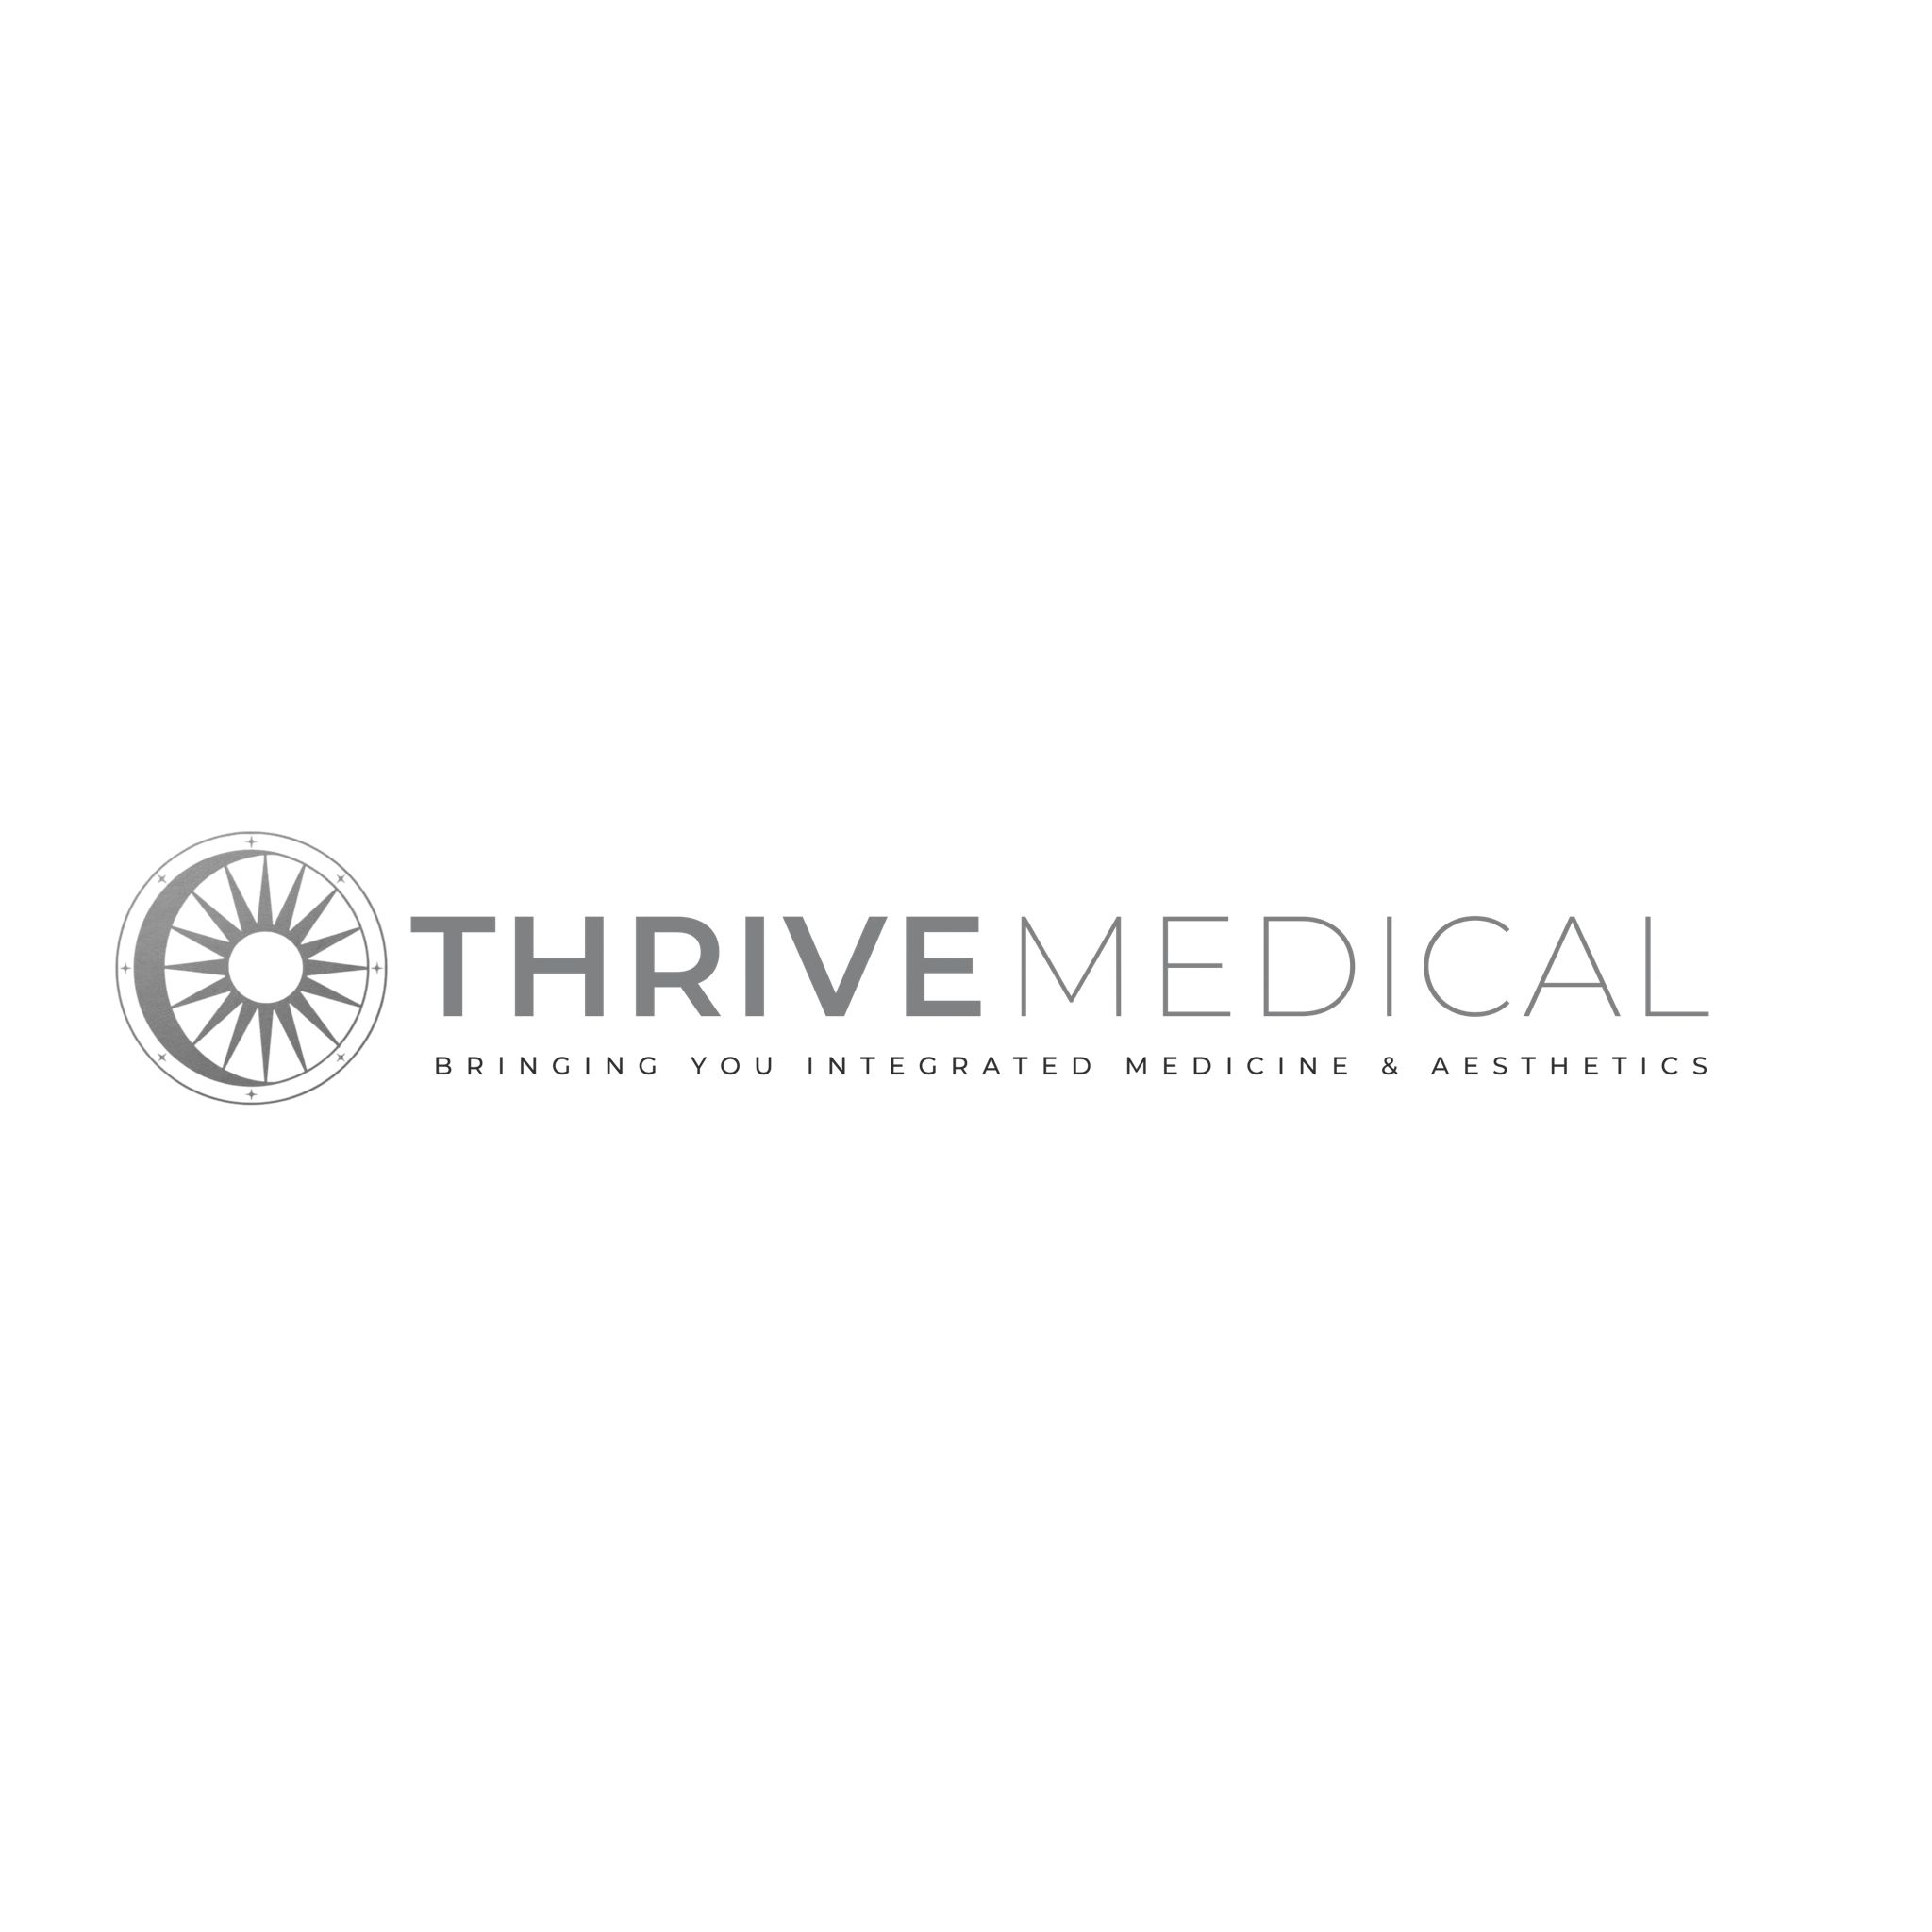 Thrive Medical Clinic